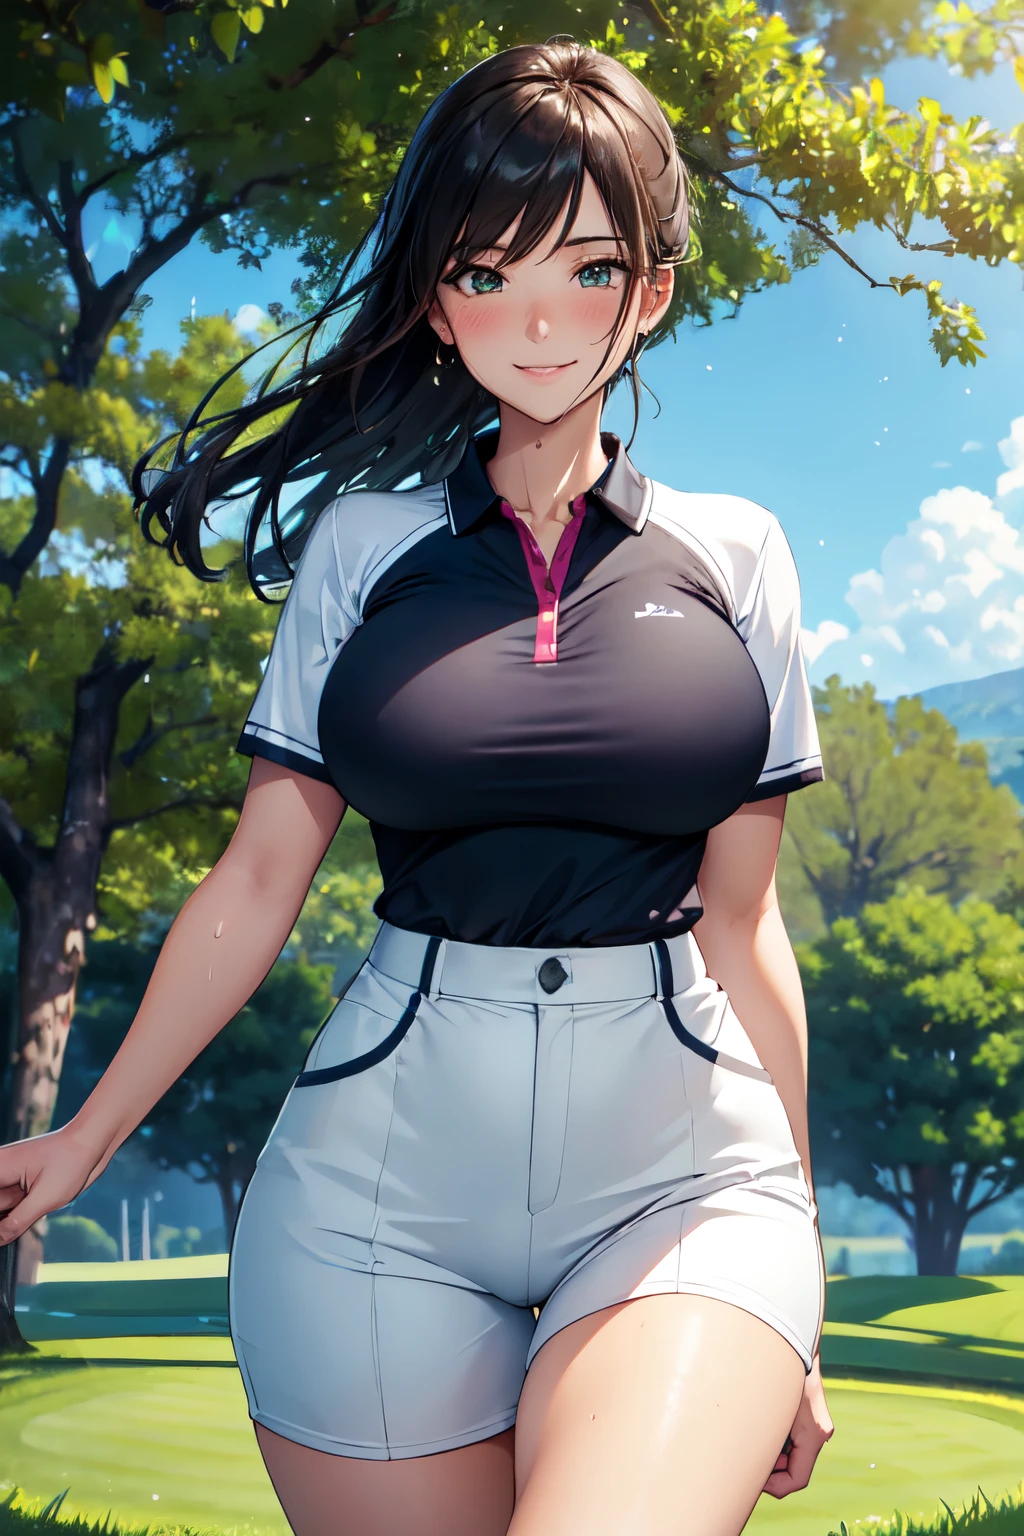 (High quality, High resolution, Fine details), Realistic, woman, golf player, garden, green grass,sporty, athletic physique, confident expression, professional golfer, elegant pose, fashionable outfit, sunlight, leaves rustling in the wind, leisurely atmosphere, scenic beauty, summer morning, solo, curvy women, sparkling eyes, (Detailed eyes), (smile), blush, (Sweat), (Oily skin), shallow depth of field